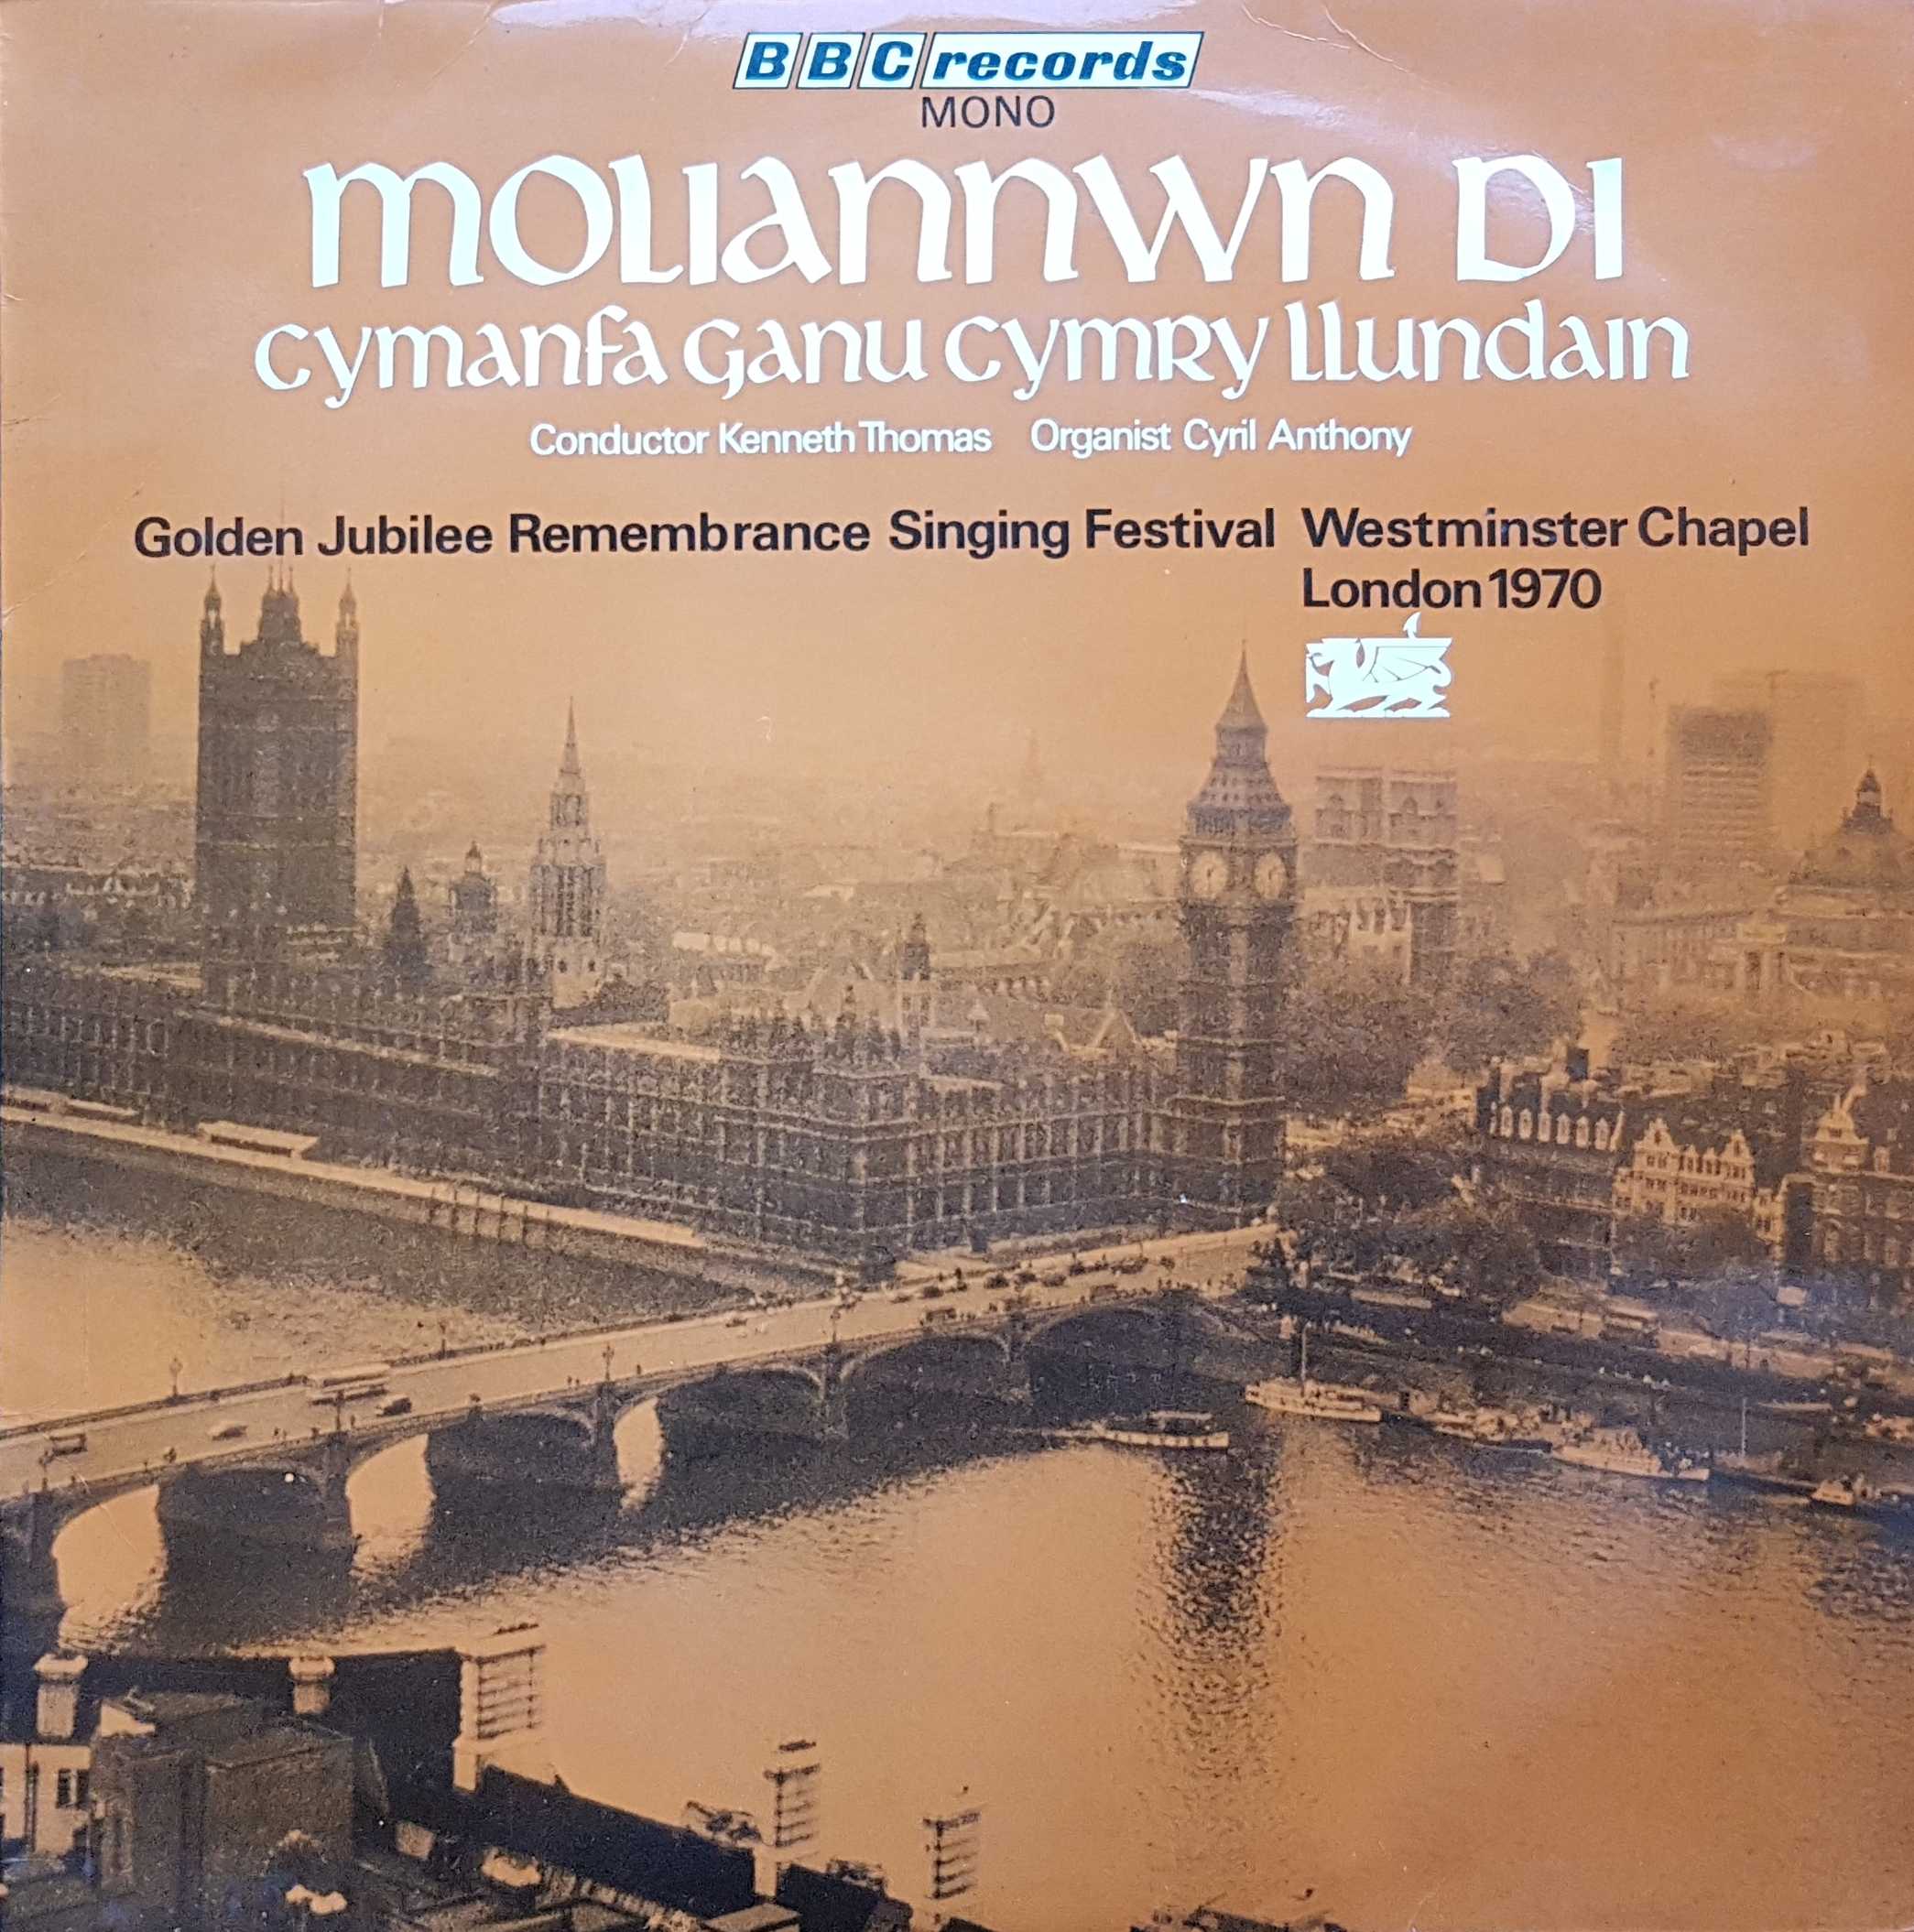 Picture of REC 108 Moliannwn Di Cymanfa Ganu Cymry Llundain by artist Cyril Anthony / Kenneth Thomas from the BBC albums - Records and Tapes library